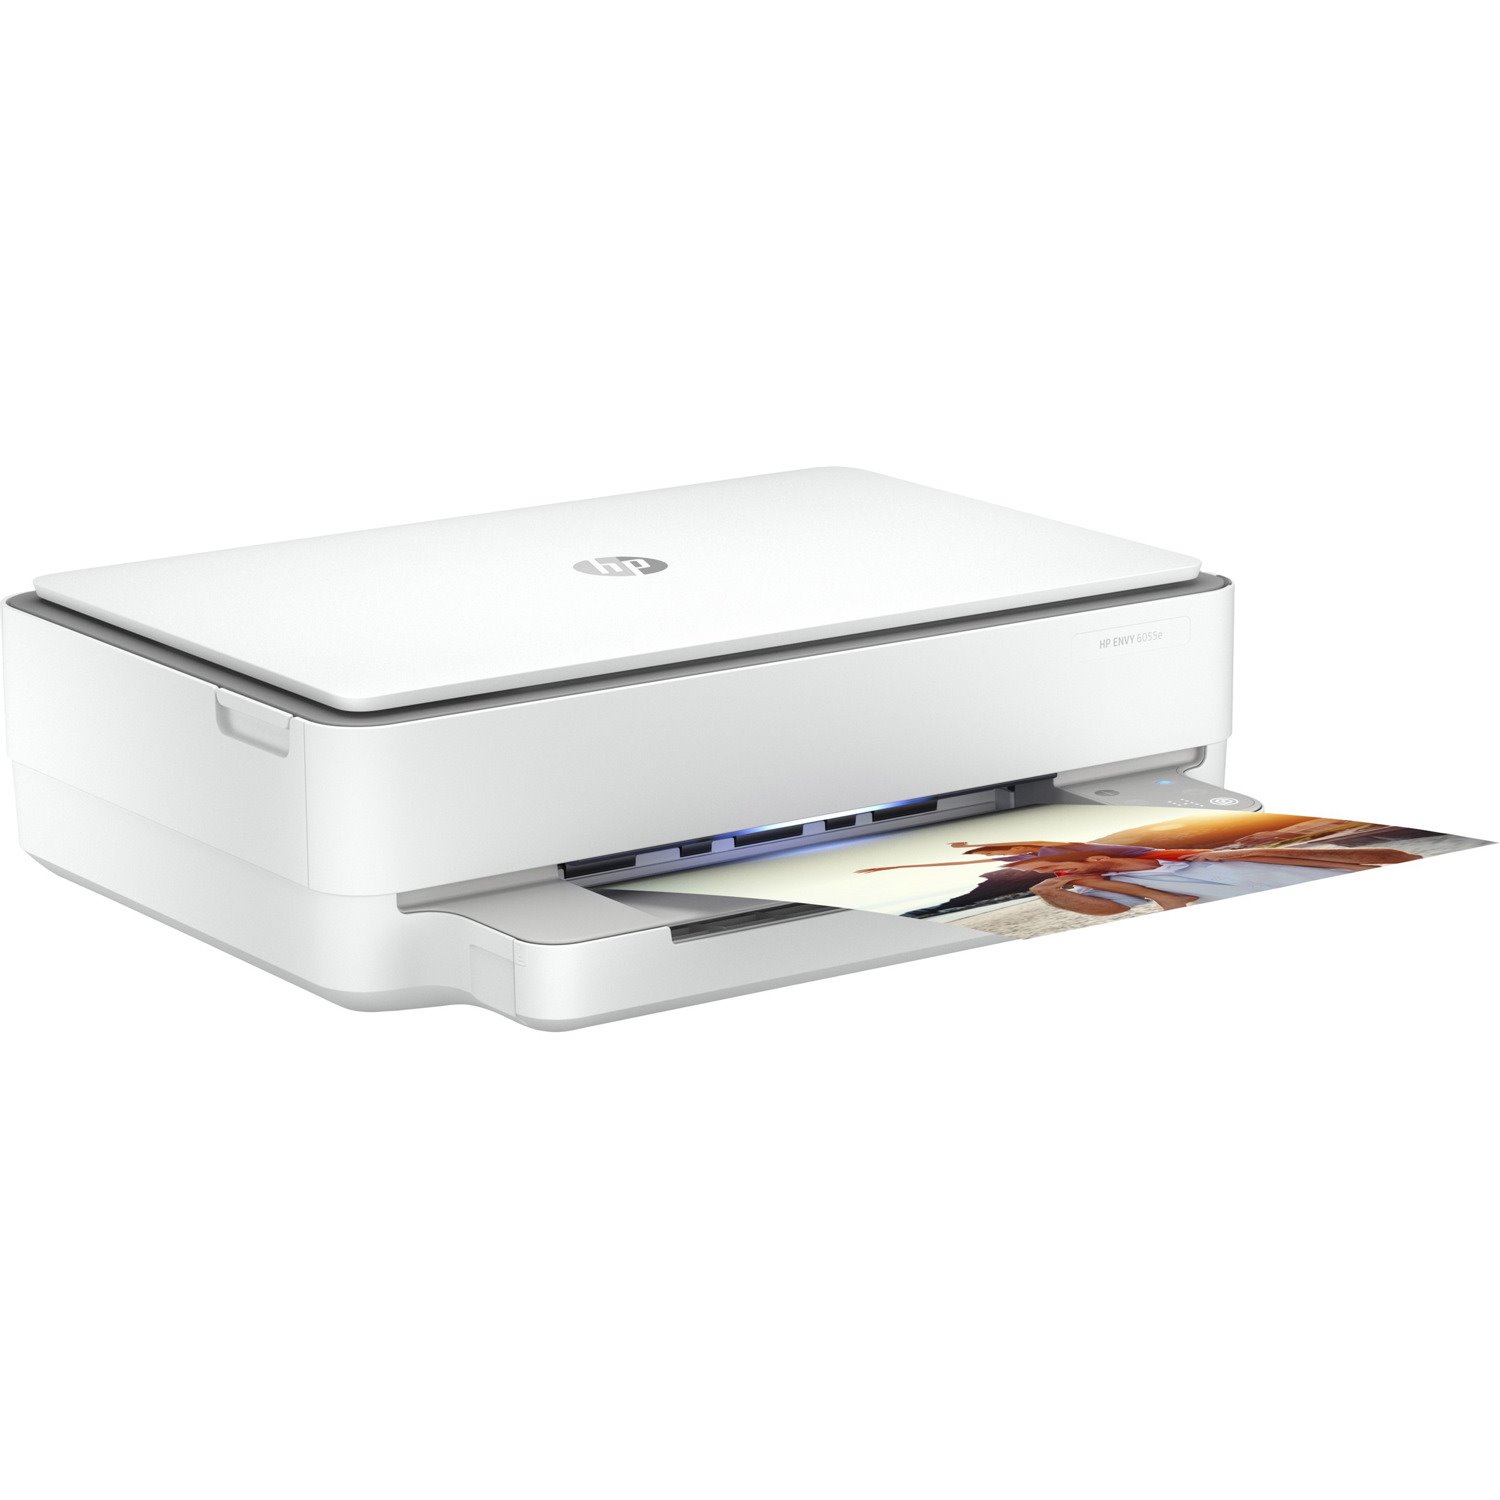 HP Envy 6055e Wireless Inkjet Multifunction Printer-Color-Copier/Scanner-4800x1200 Print-Automatic Duplex Print-1000 Pages Monthly-100 sheets Input-Color Scanner-1200 Optical Scan-Wireless LAN-HP Smart App-Apple AirPrint-Mopria